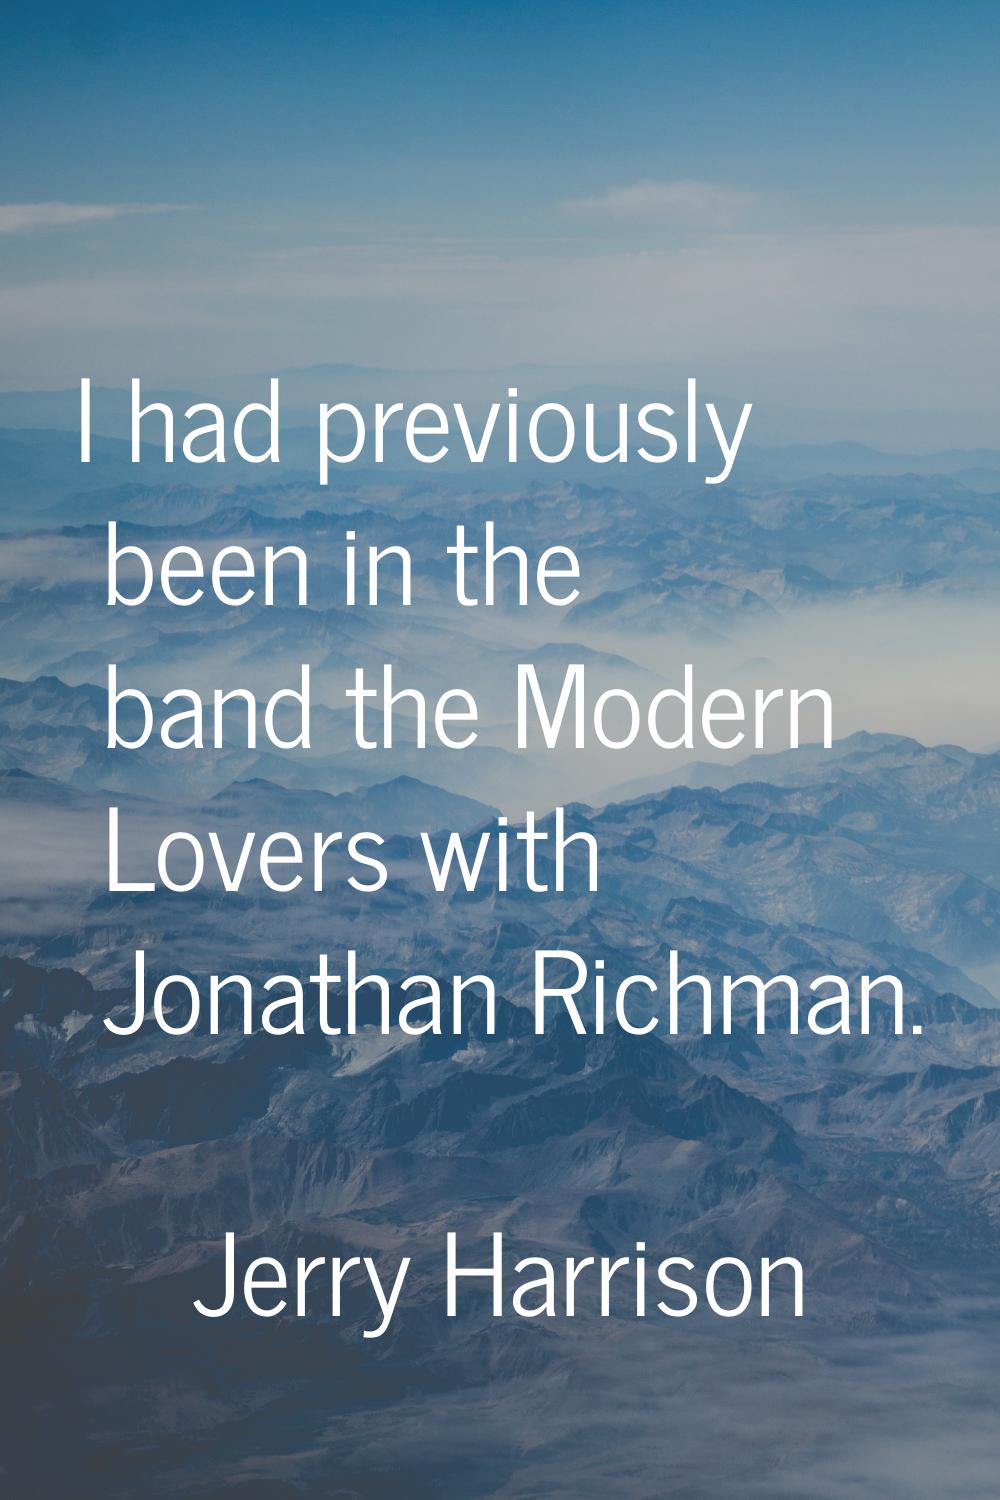 I had previously been in the band the Modern Lovers with Jonathan Richman.